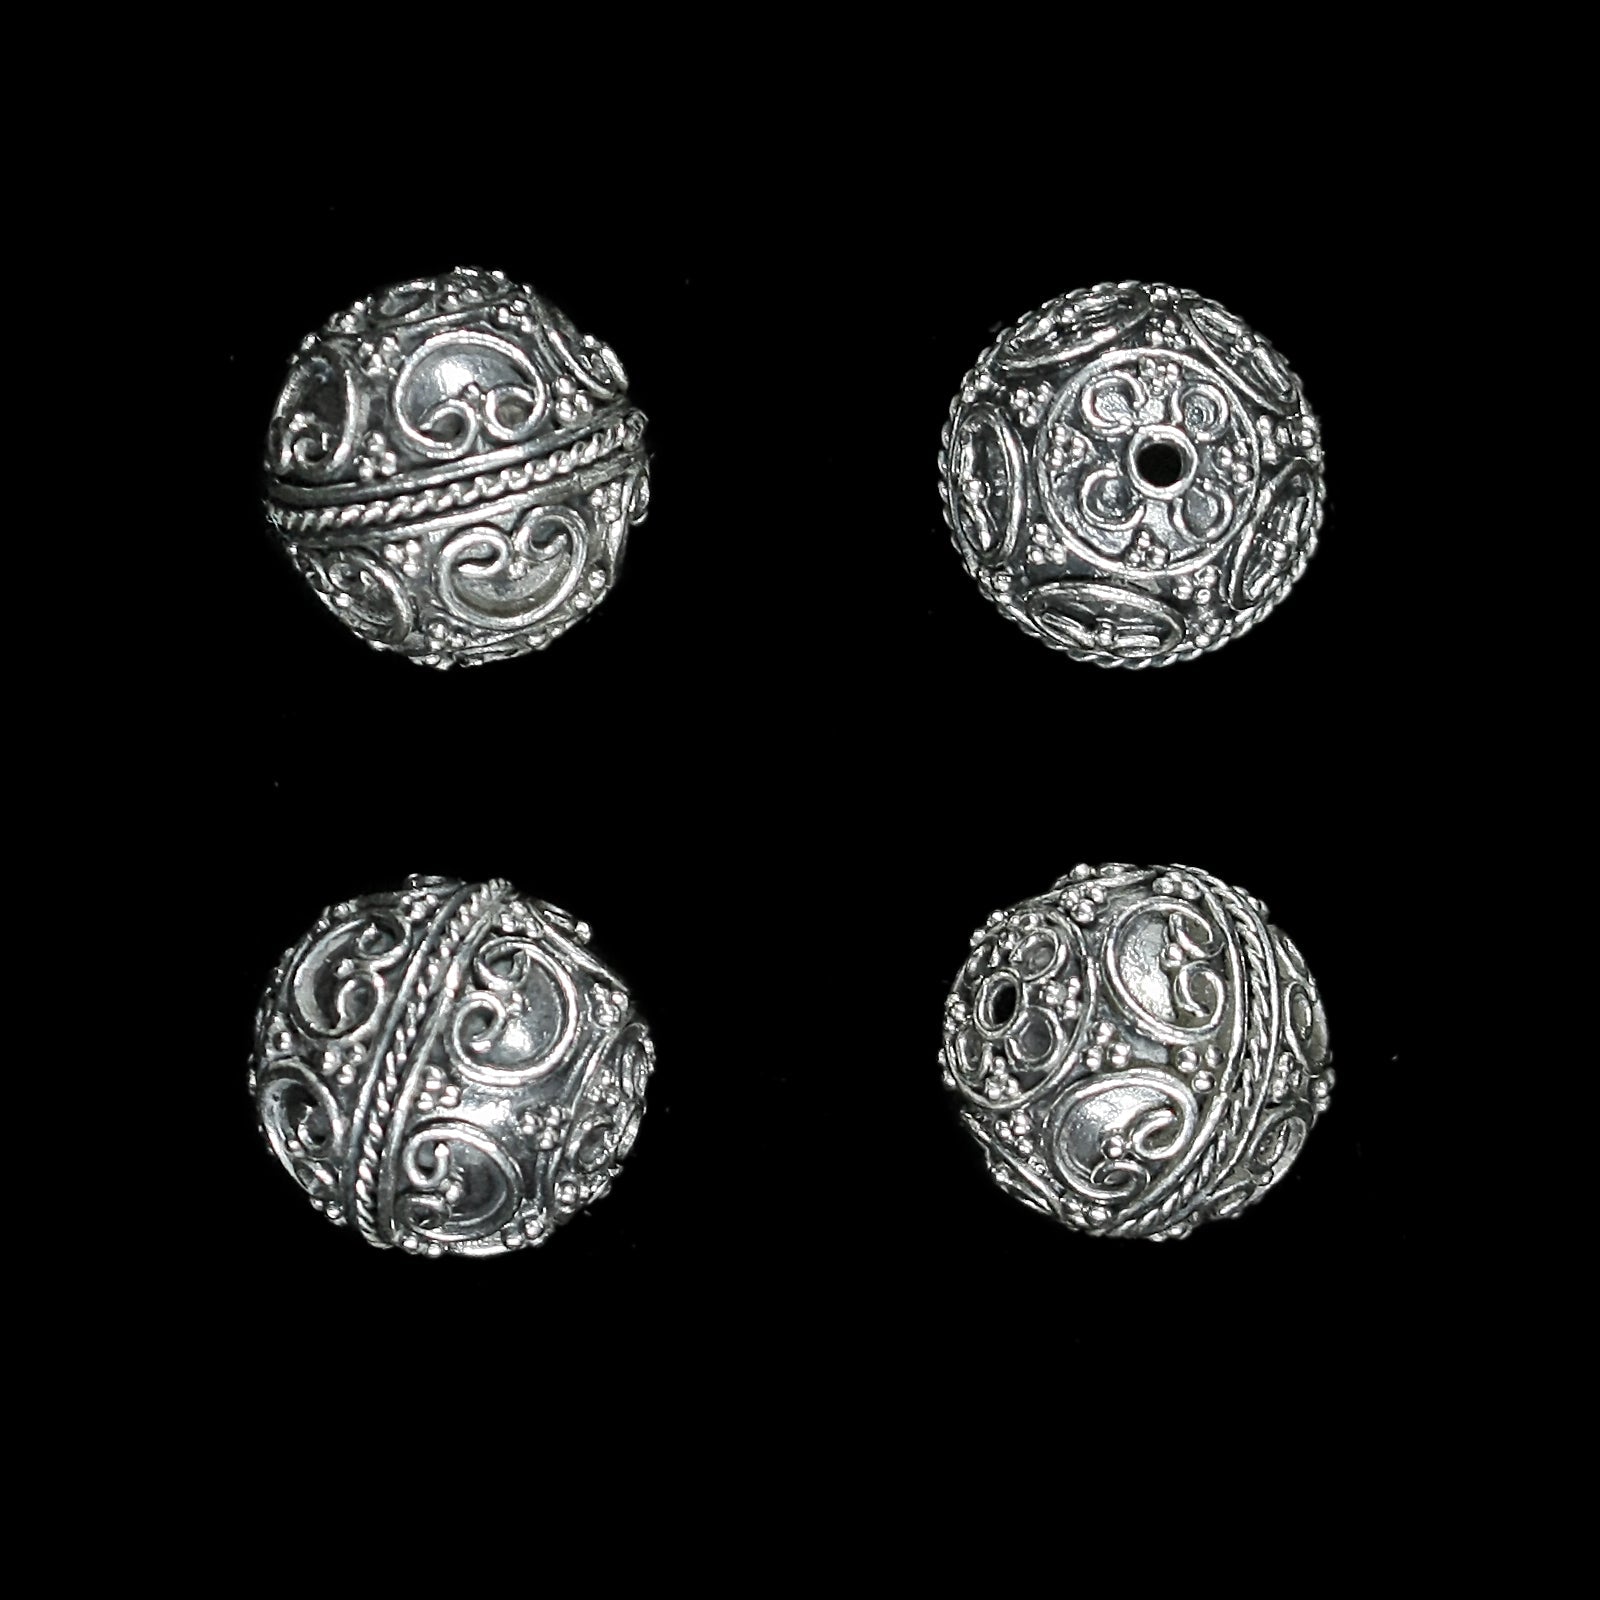 Silver Viking Bead from Visby - Curly